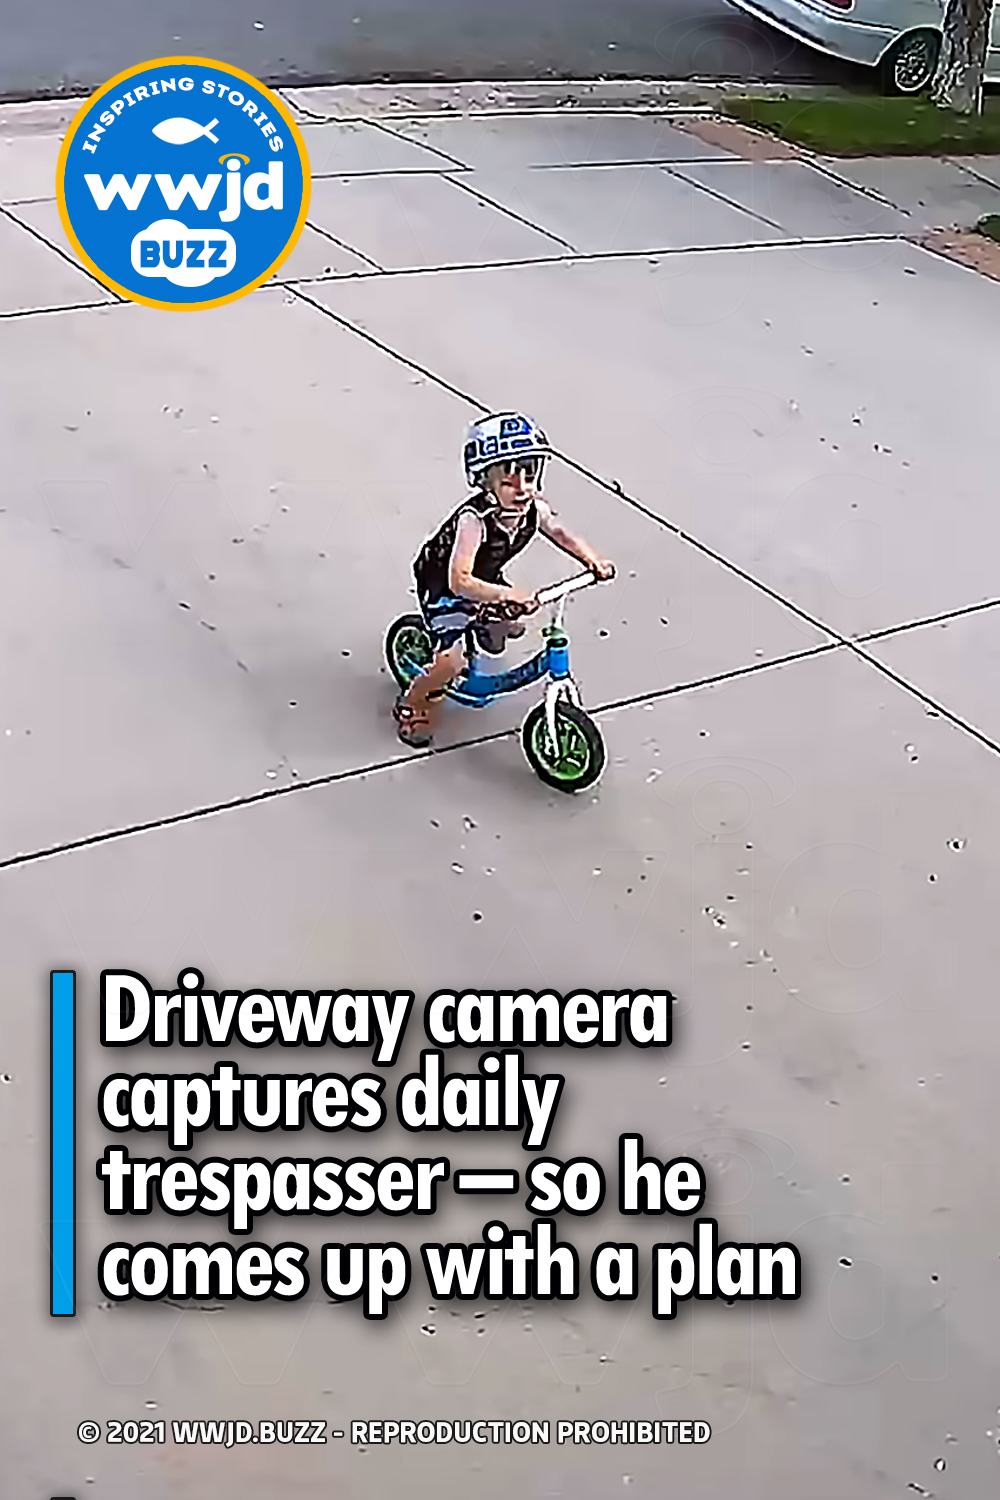 Driveway camera captures daily trespasser – so he comes up with a plan